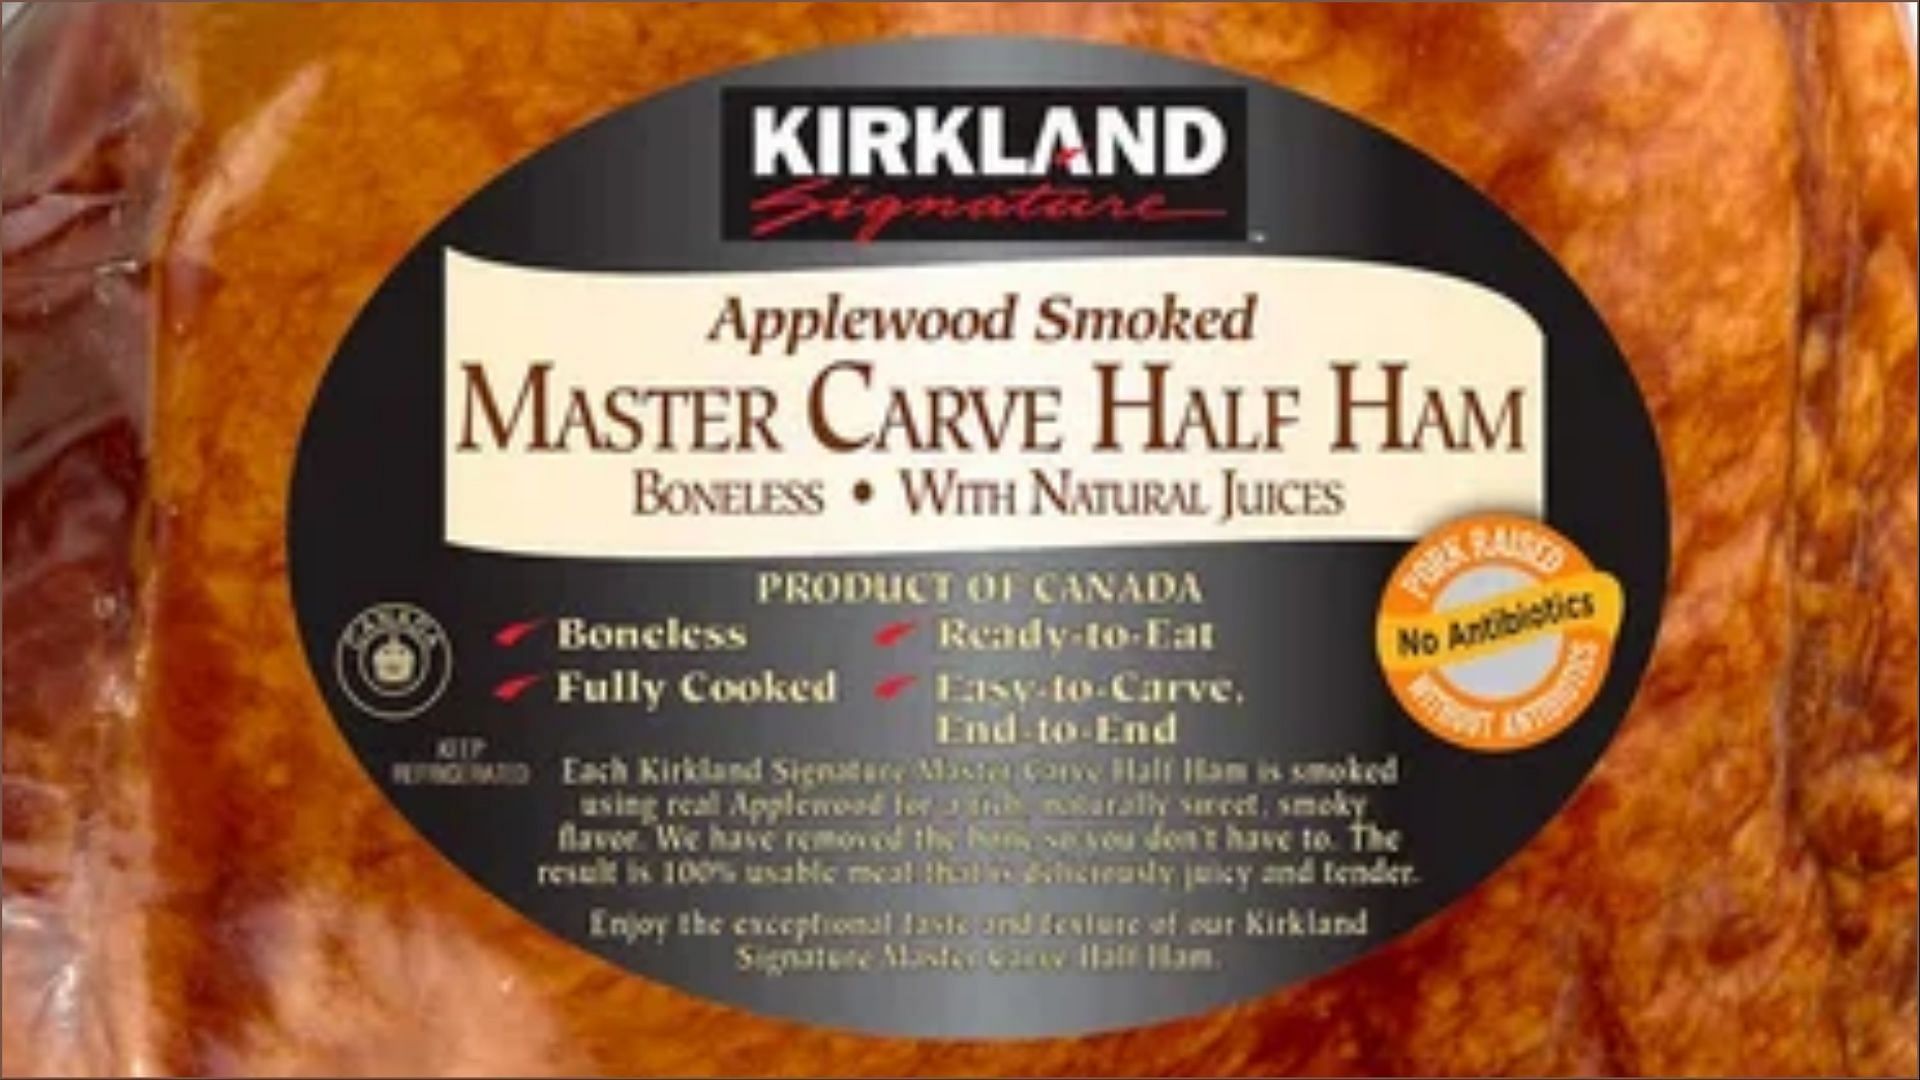 Costco recalls 2.7 million cans of Kirkland cold brew because of